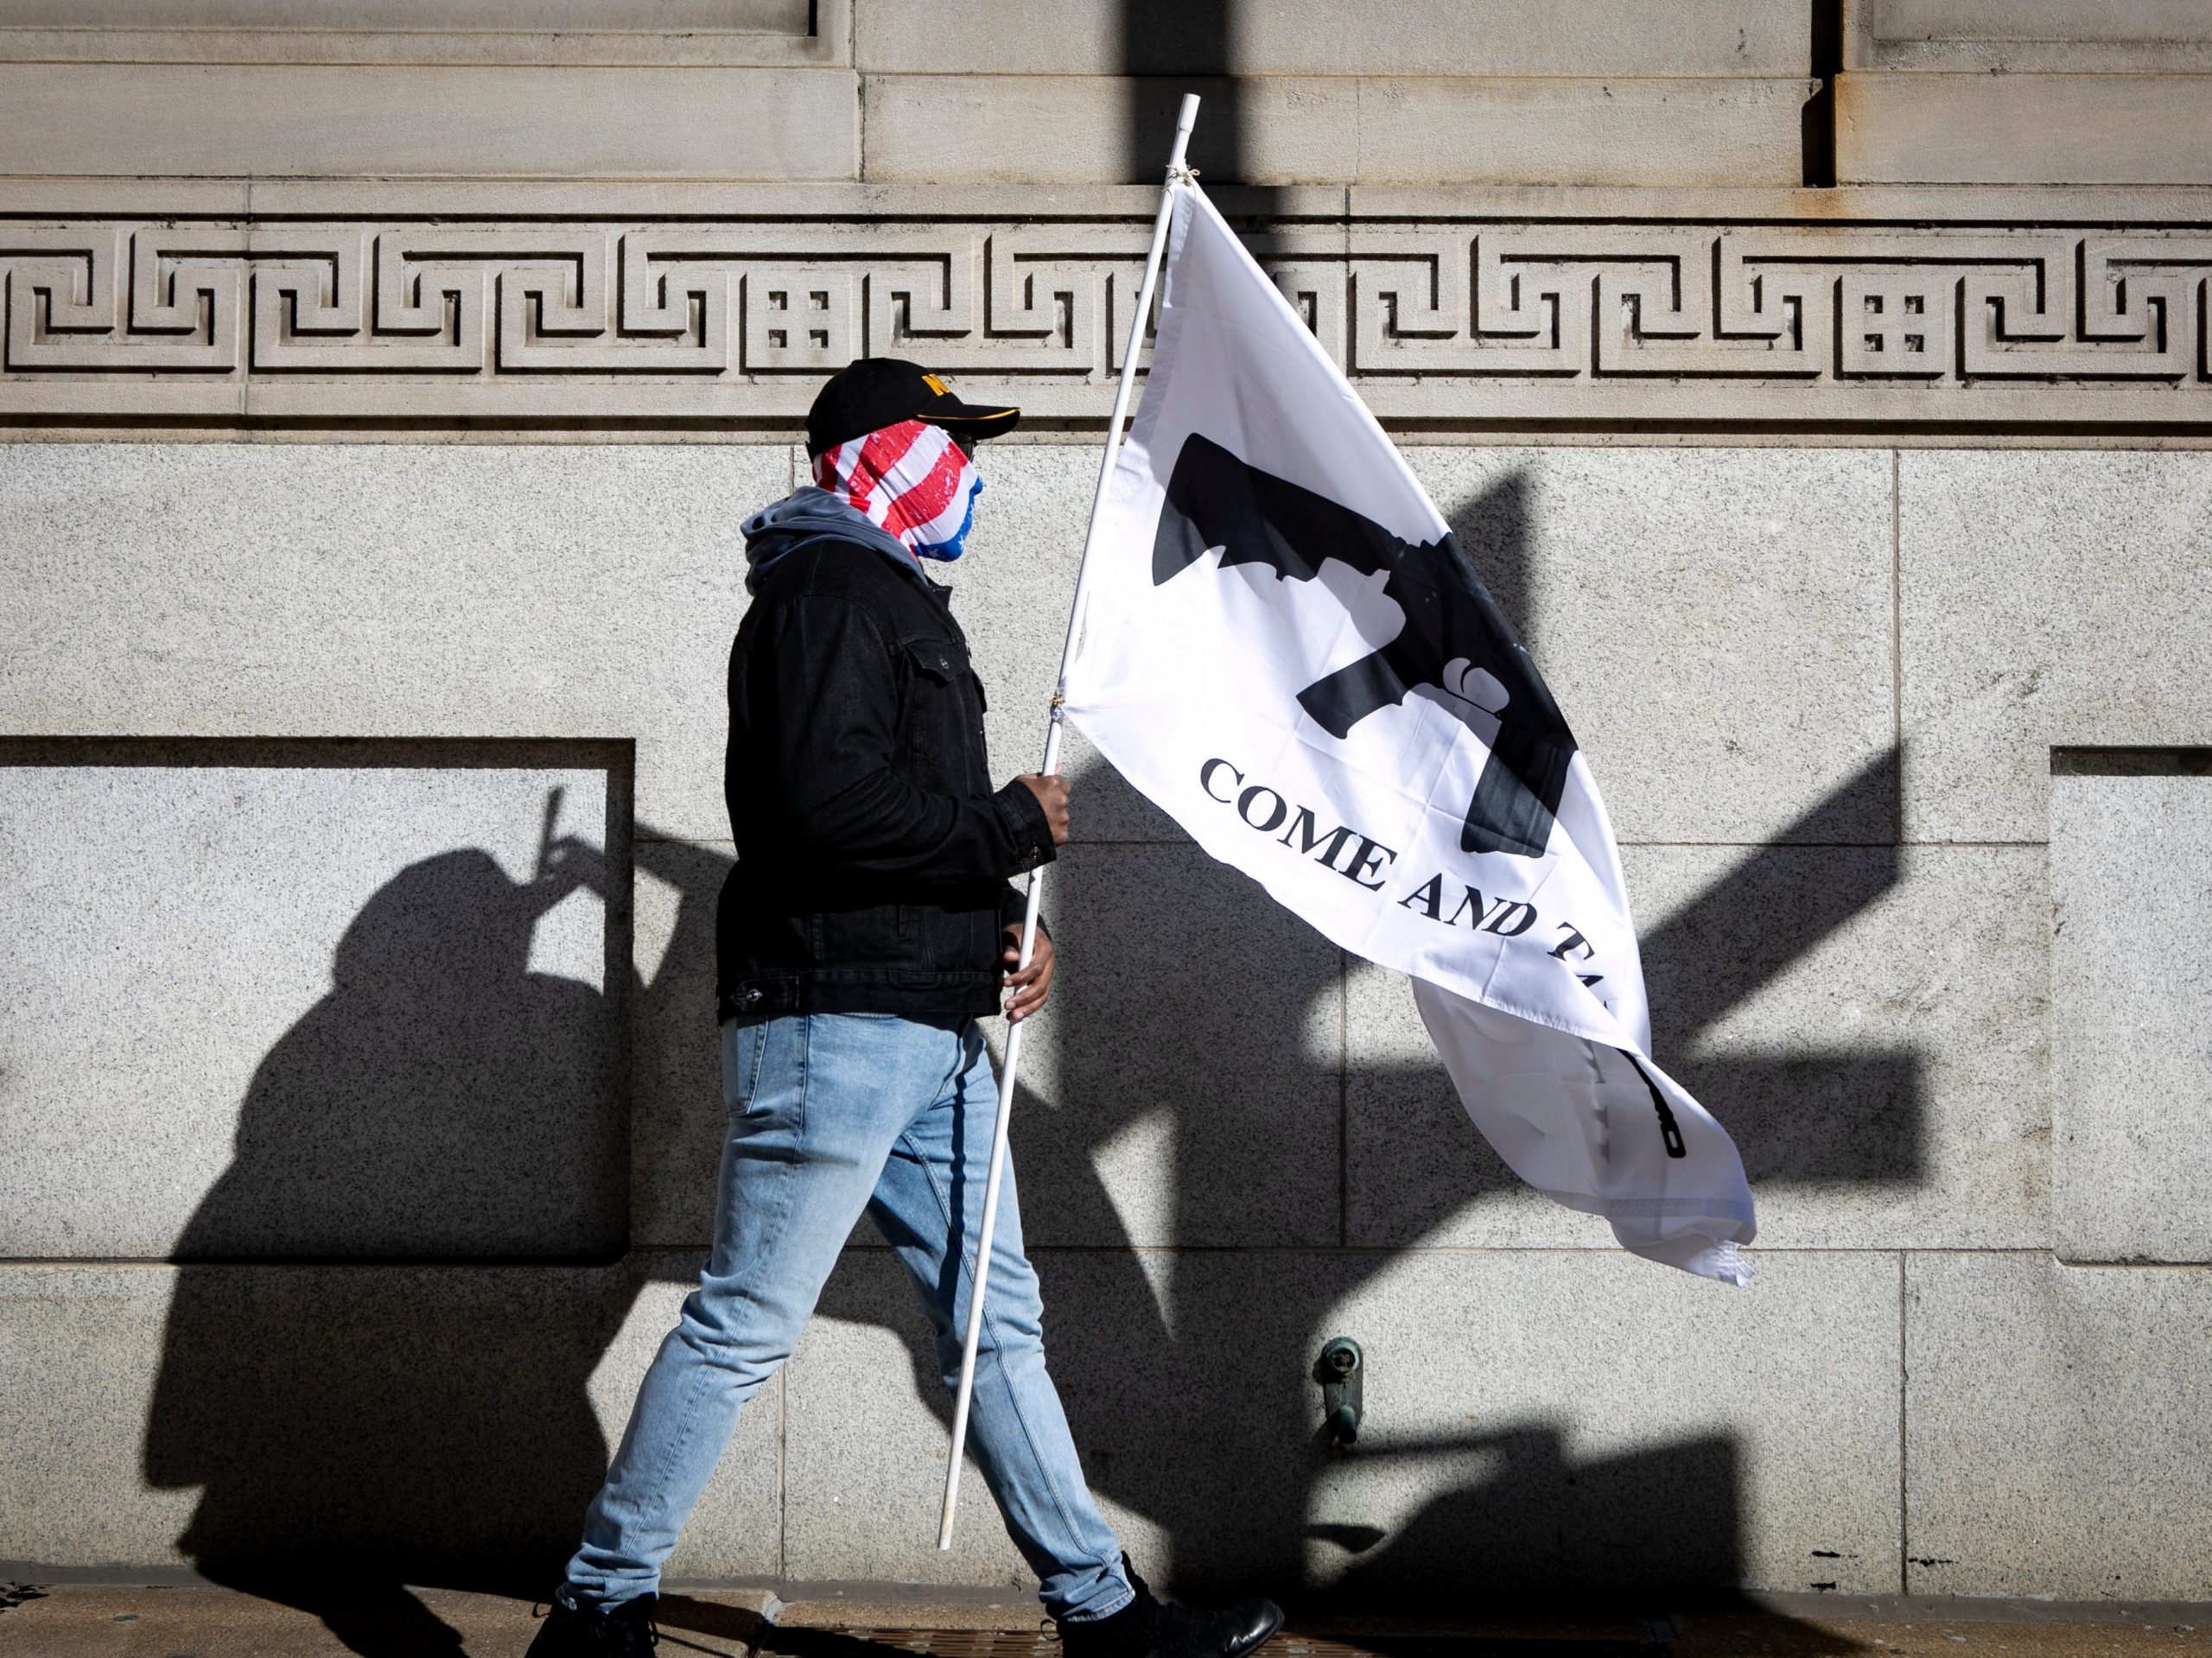 A man walks with an American flag mask over his face and carries a white flag with the image of a gun that reads "come and take it."